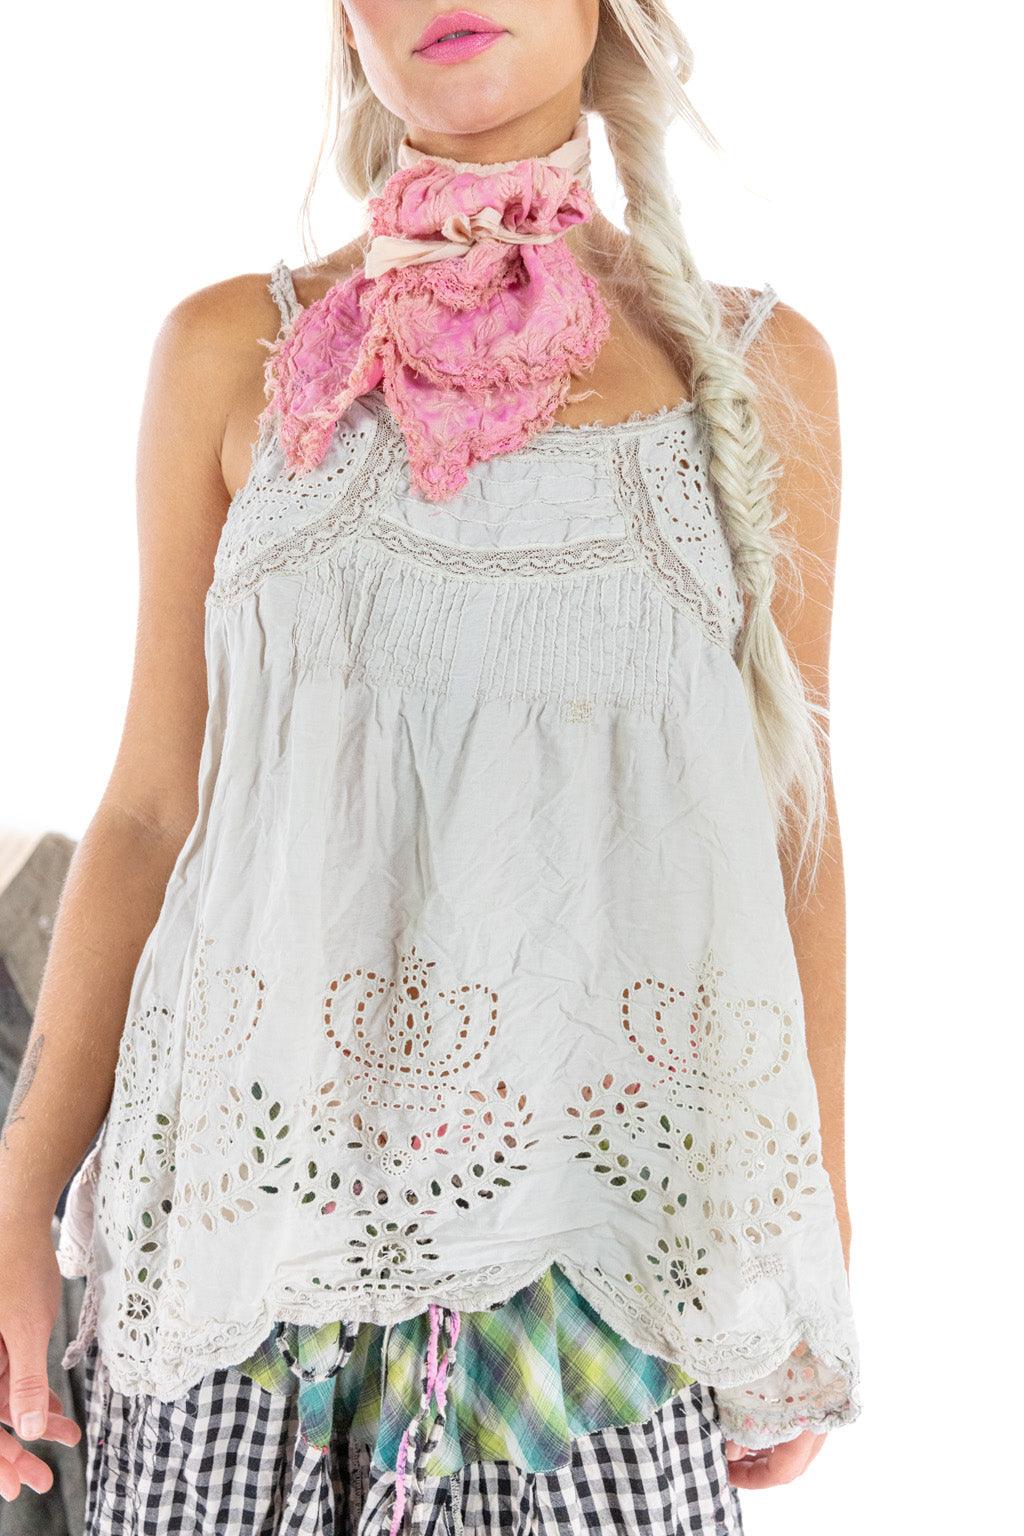 Eyelet Clementine Tank - Magnolia Pearl Clothing